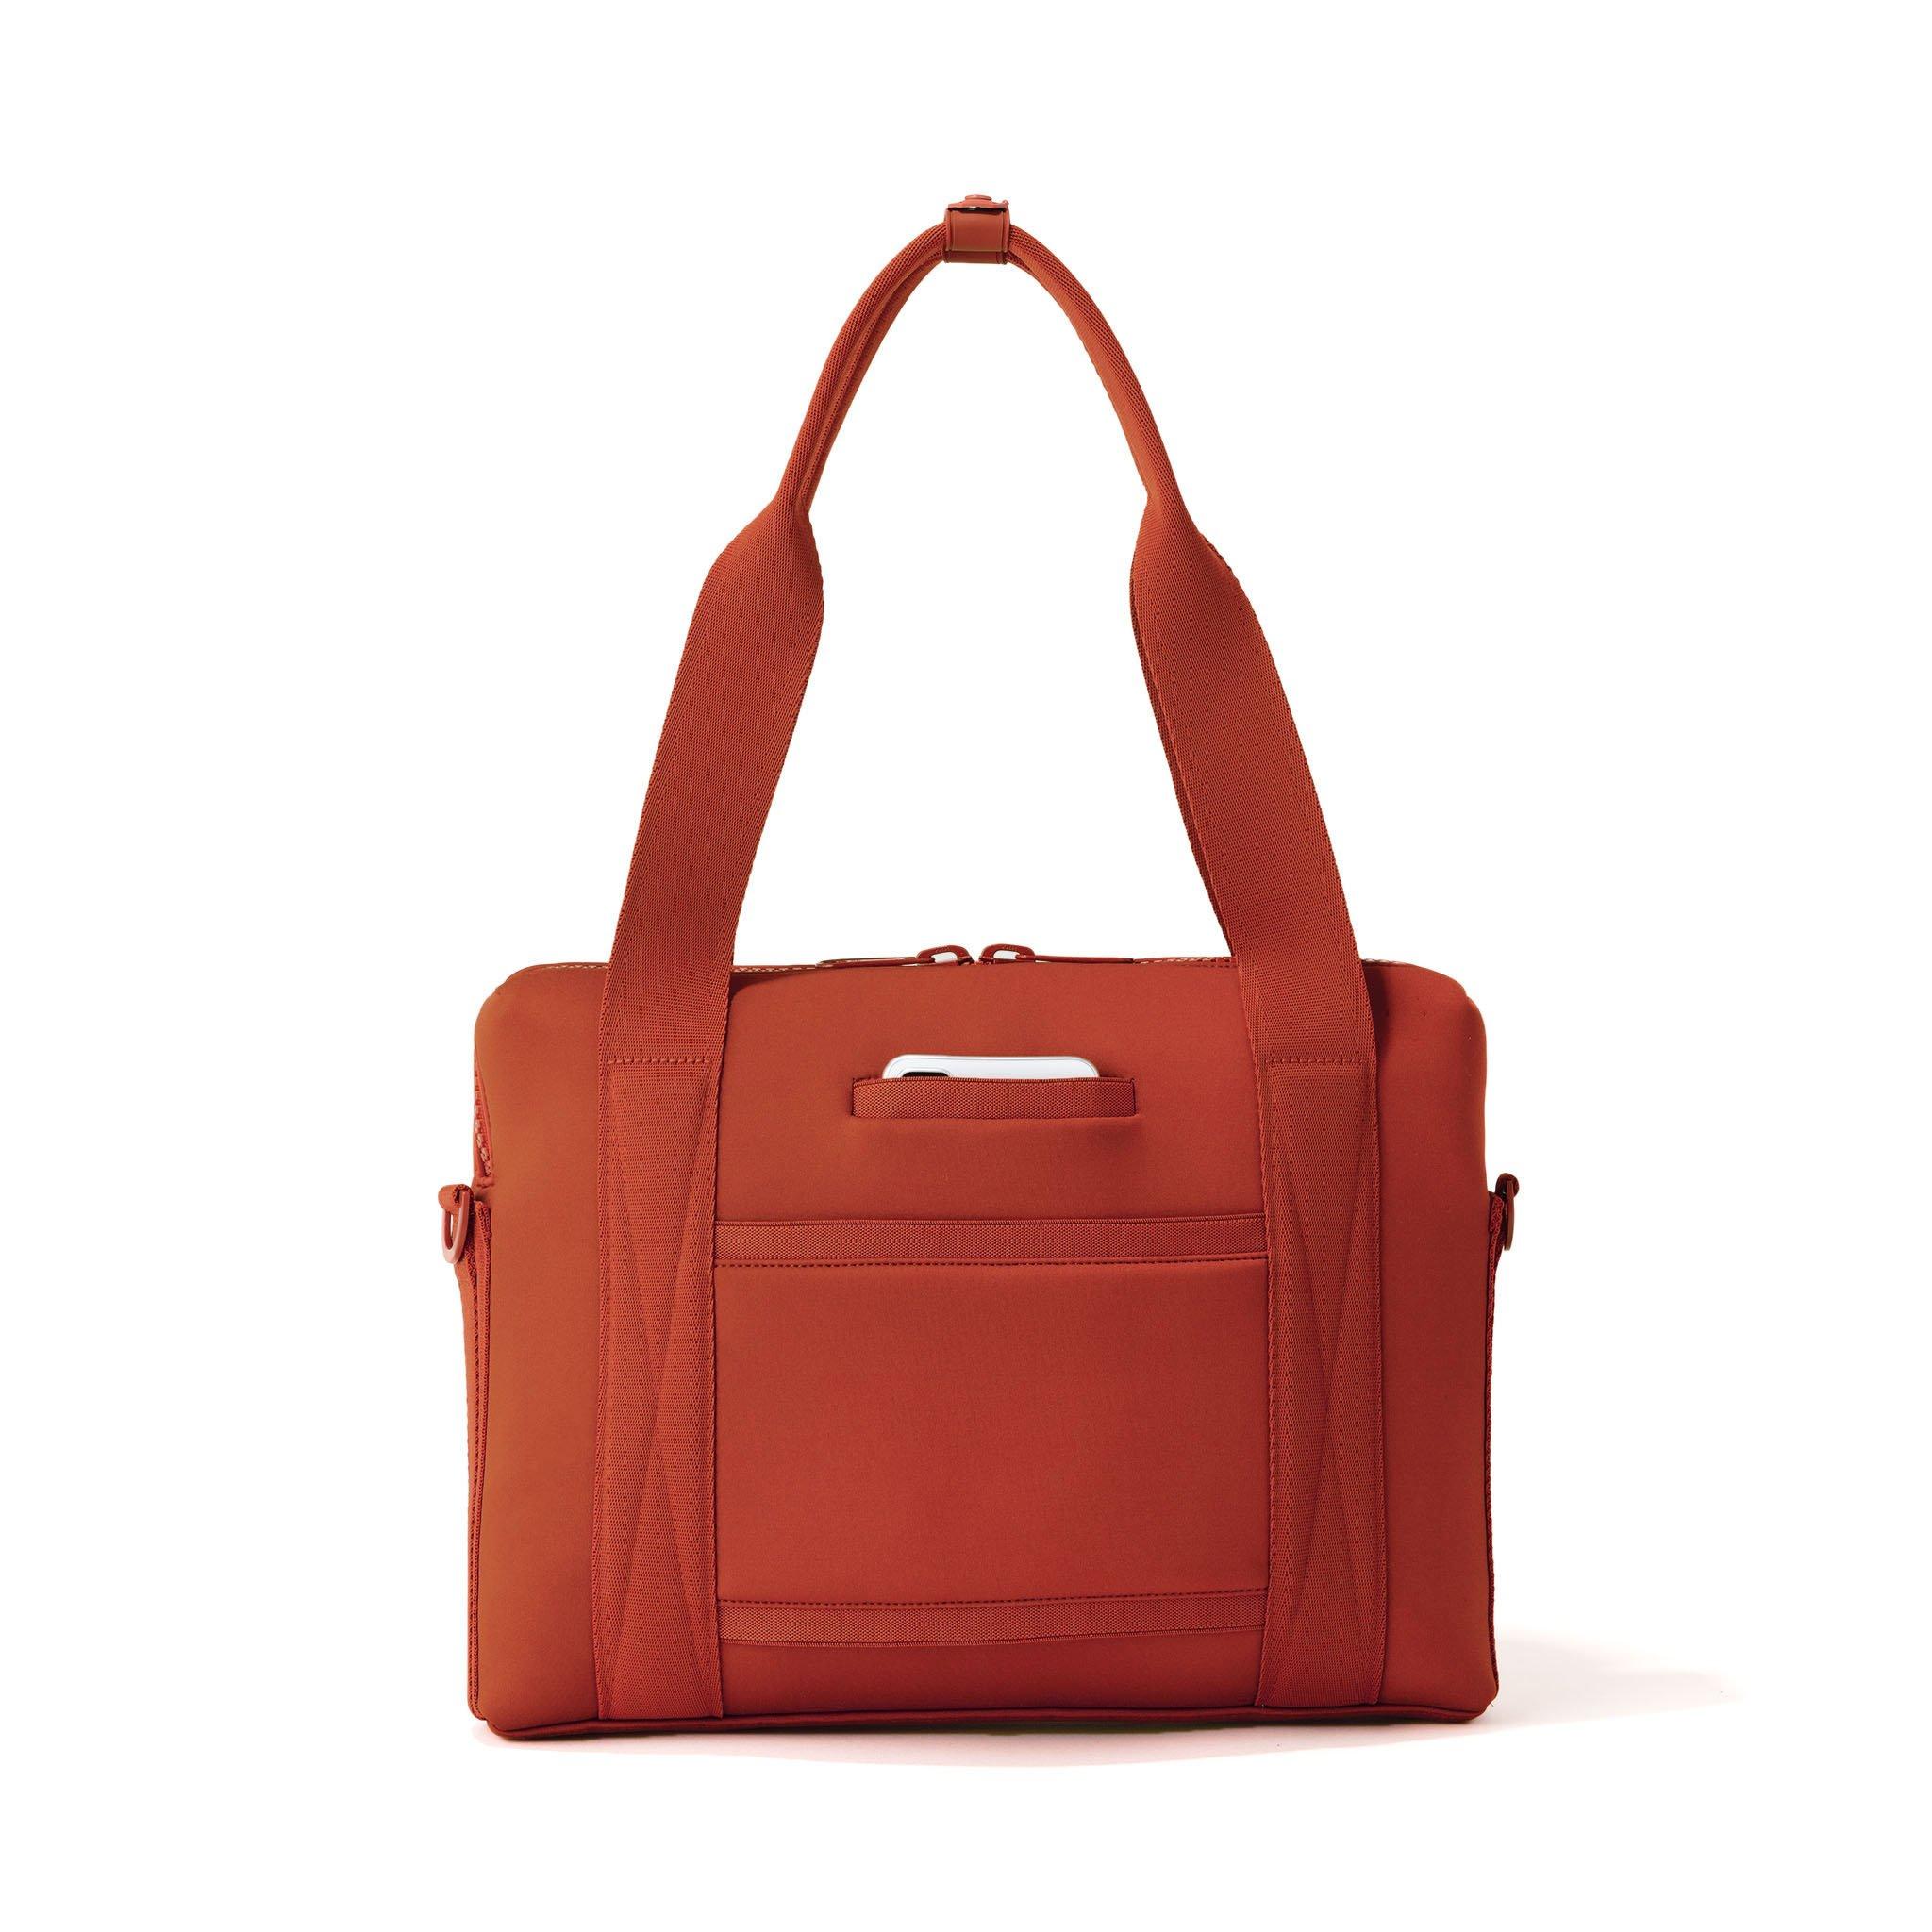 Dagne Dover Ryan Laptop Bag - Clay Red - Medium in Red - Lyst